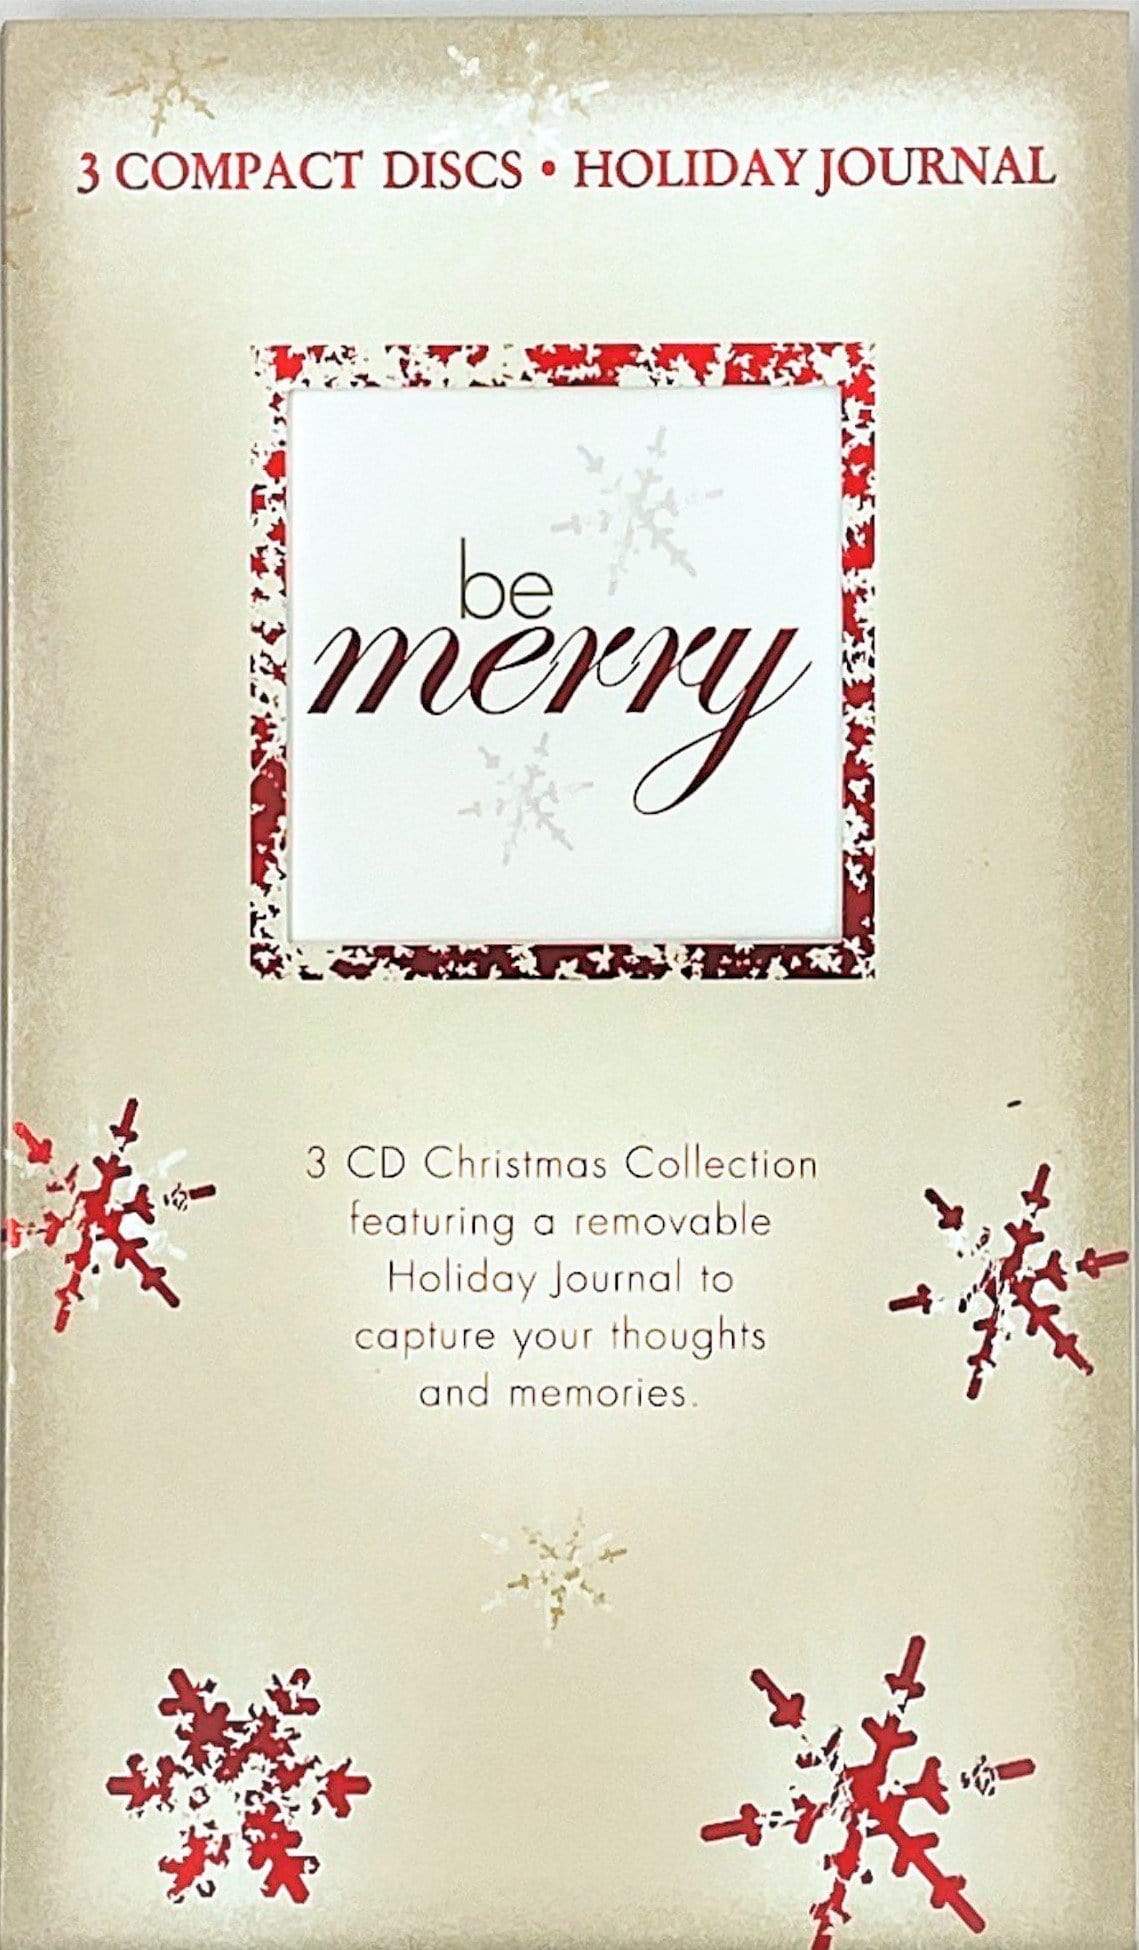 HOLIDAY JOURNAL BE MERRY (3 COMPACT DISCS)